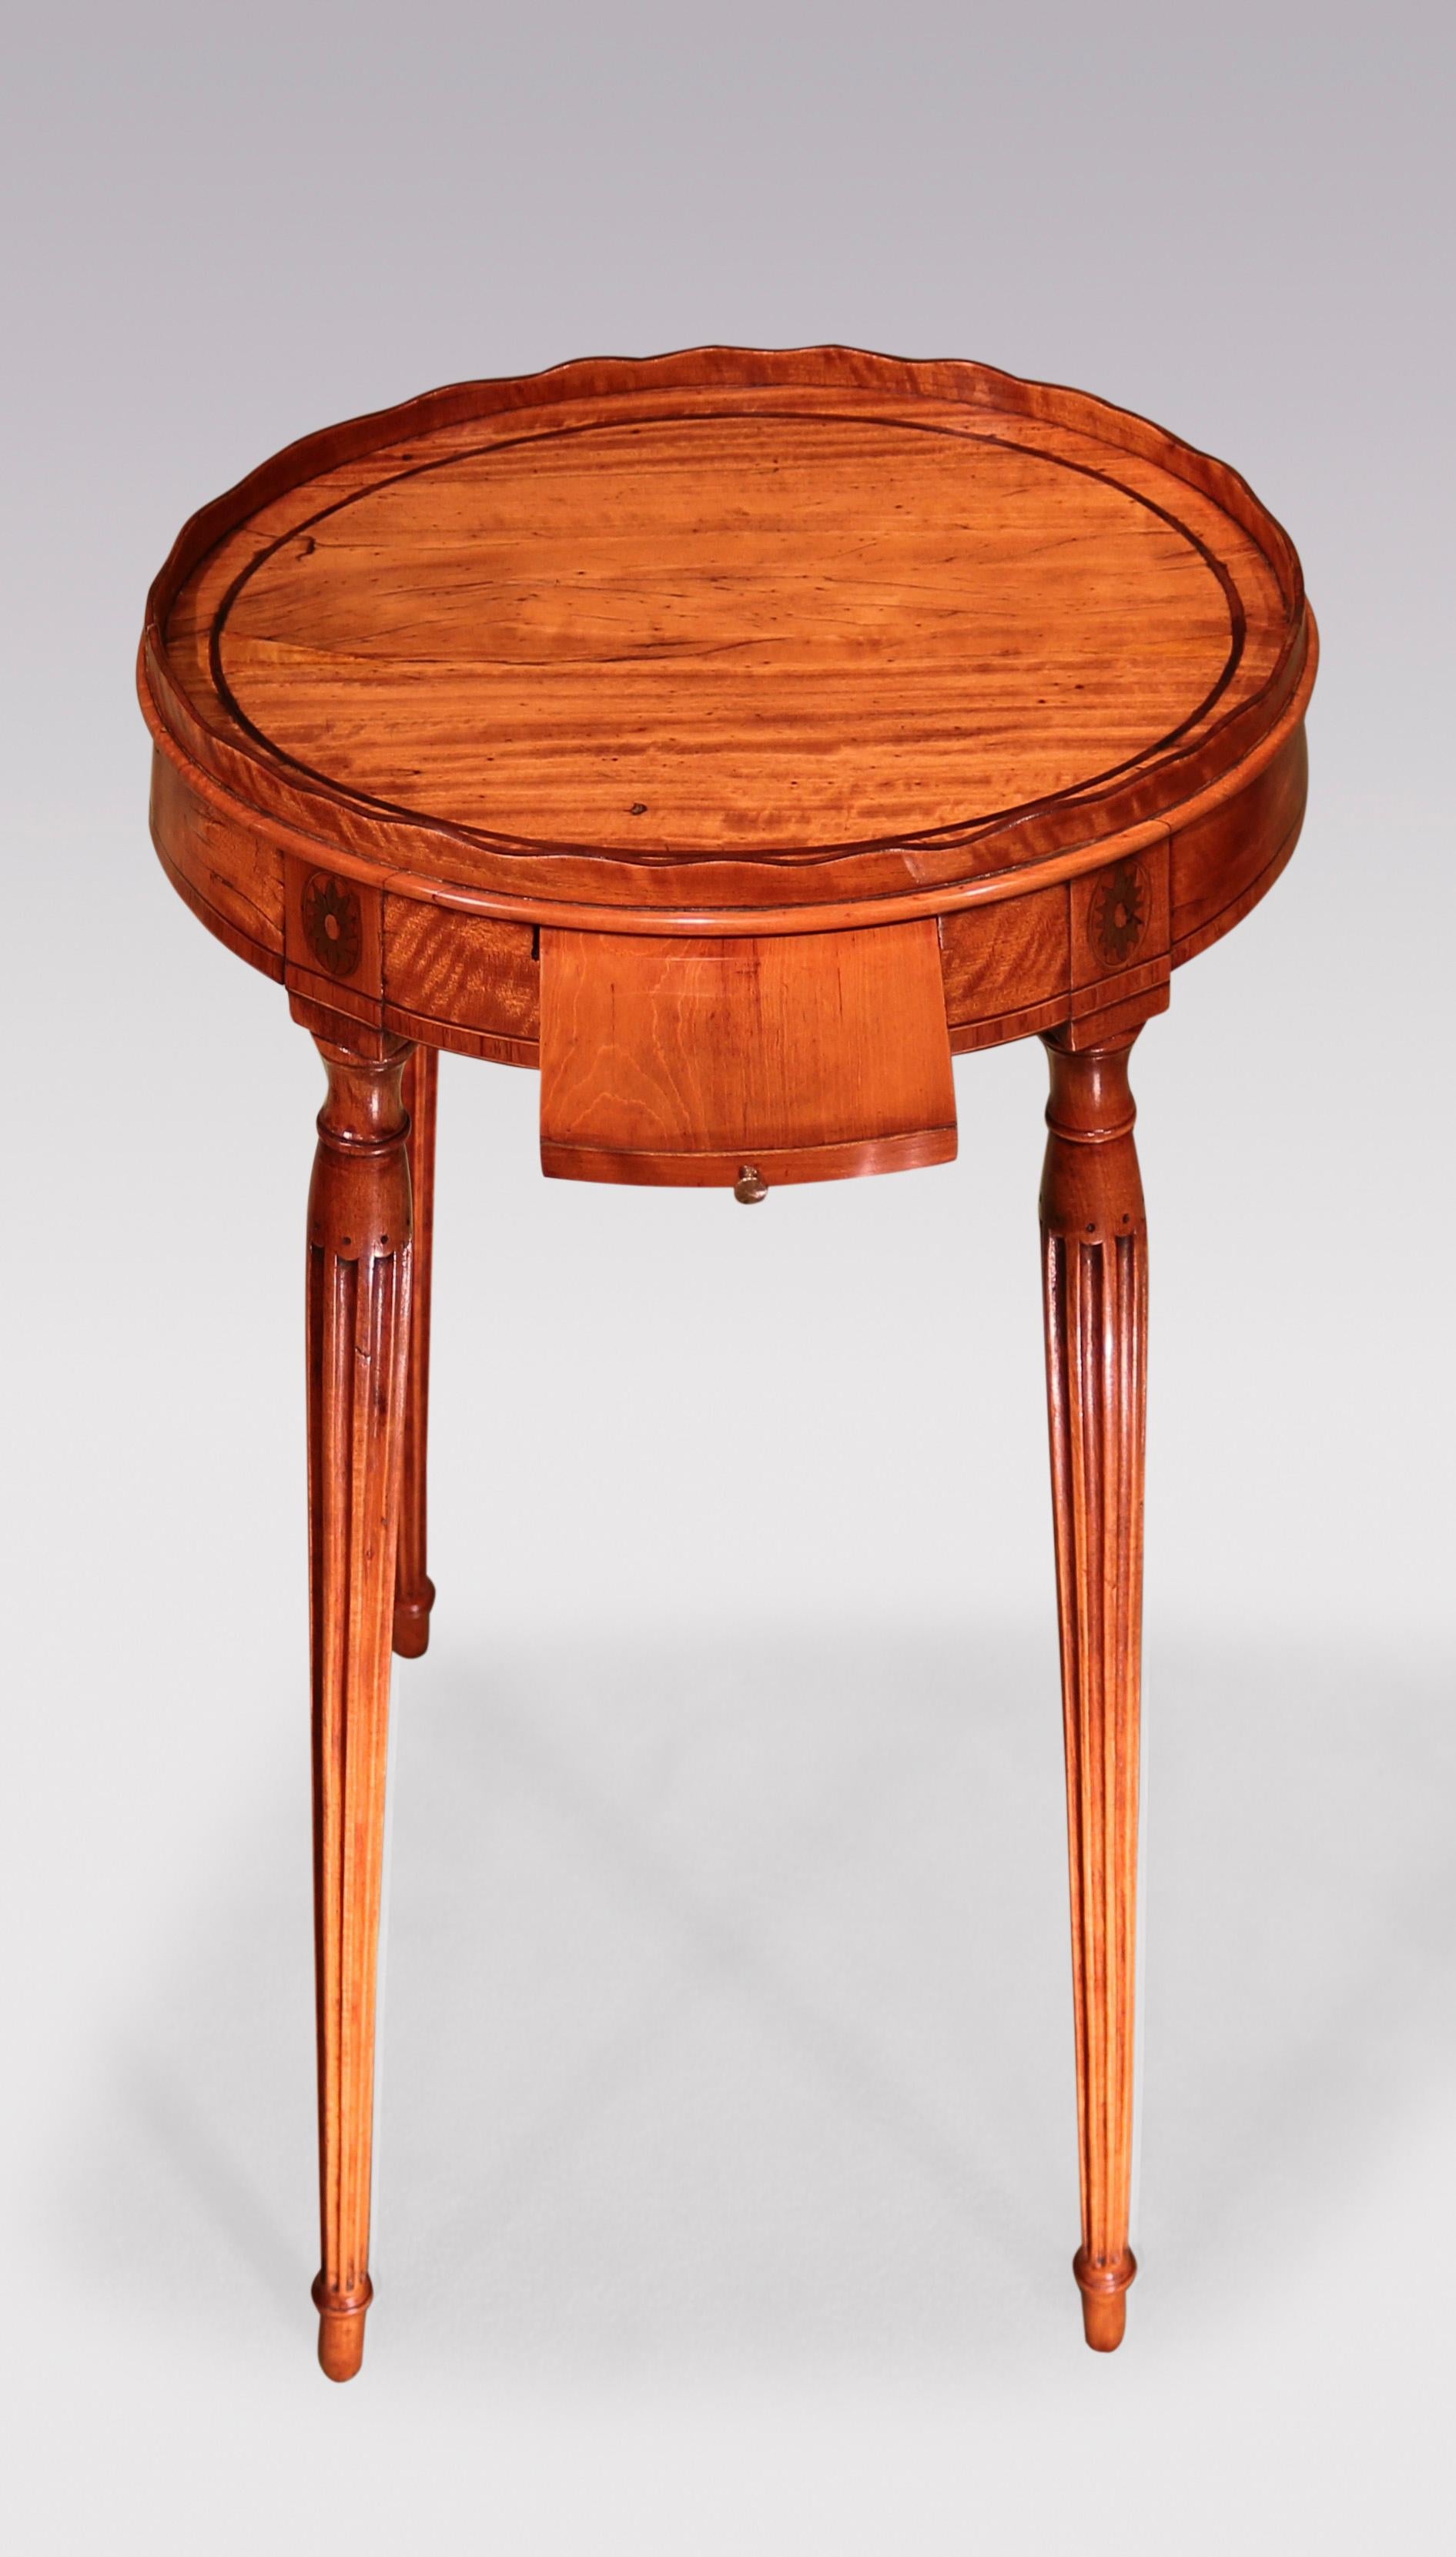 English George III Period Oval Satinwood Kettlestand For Sale